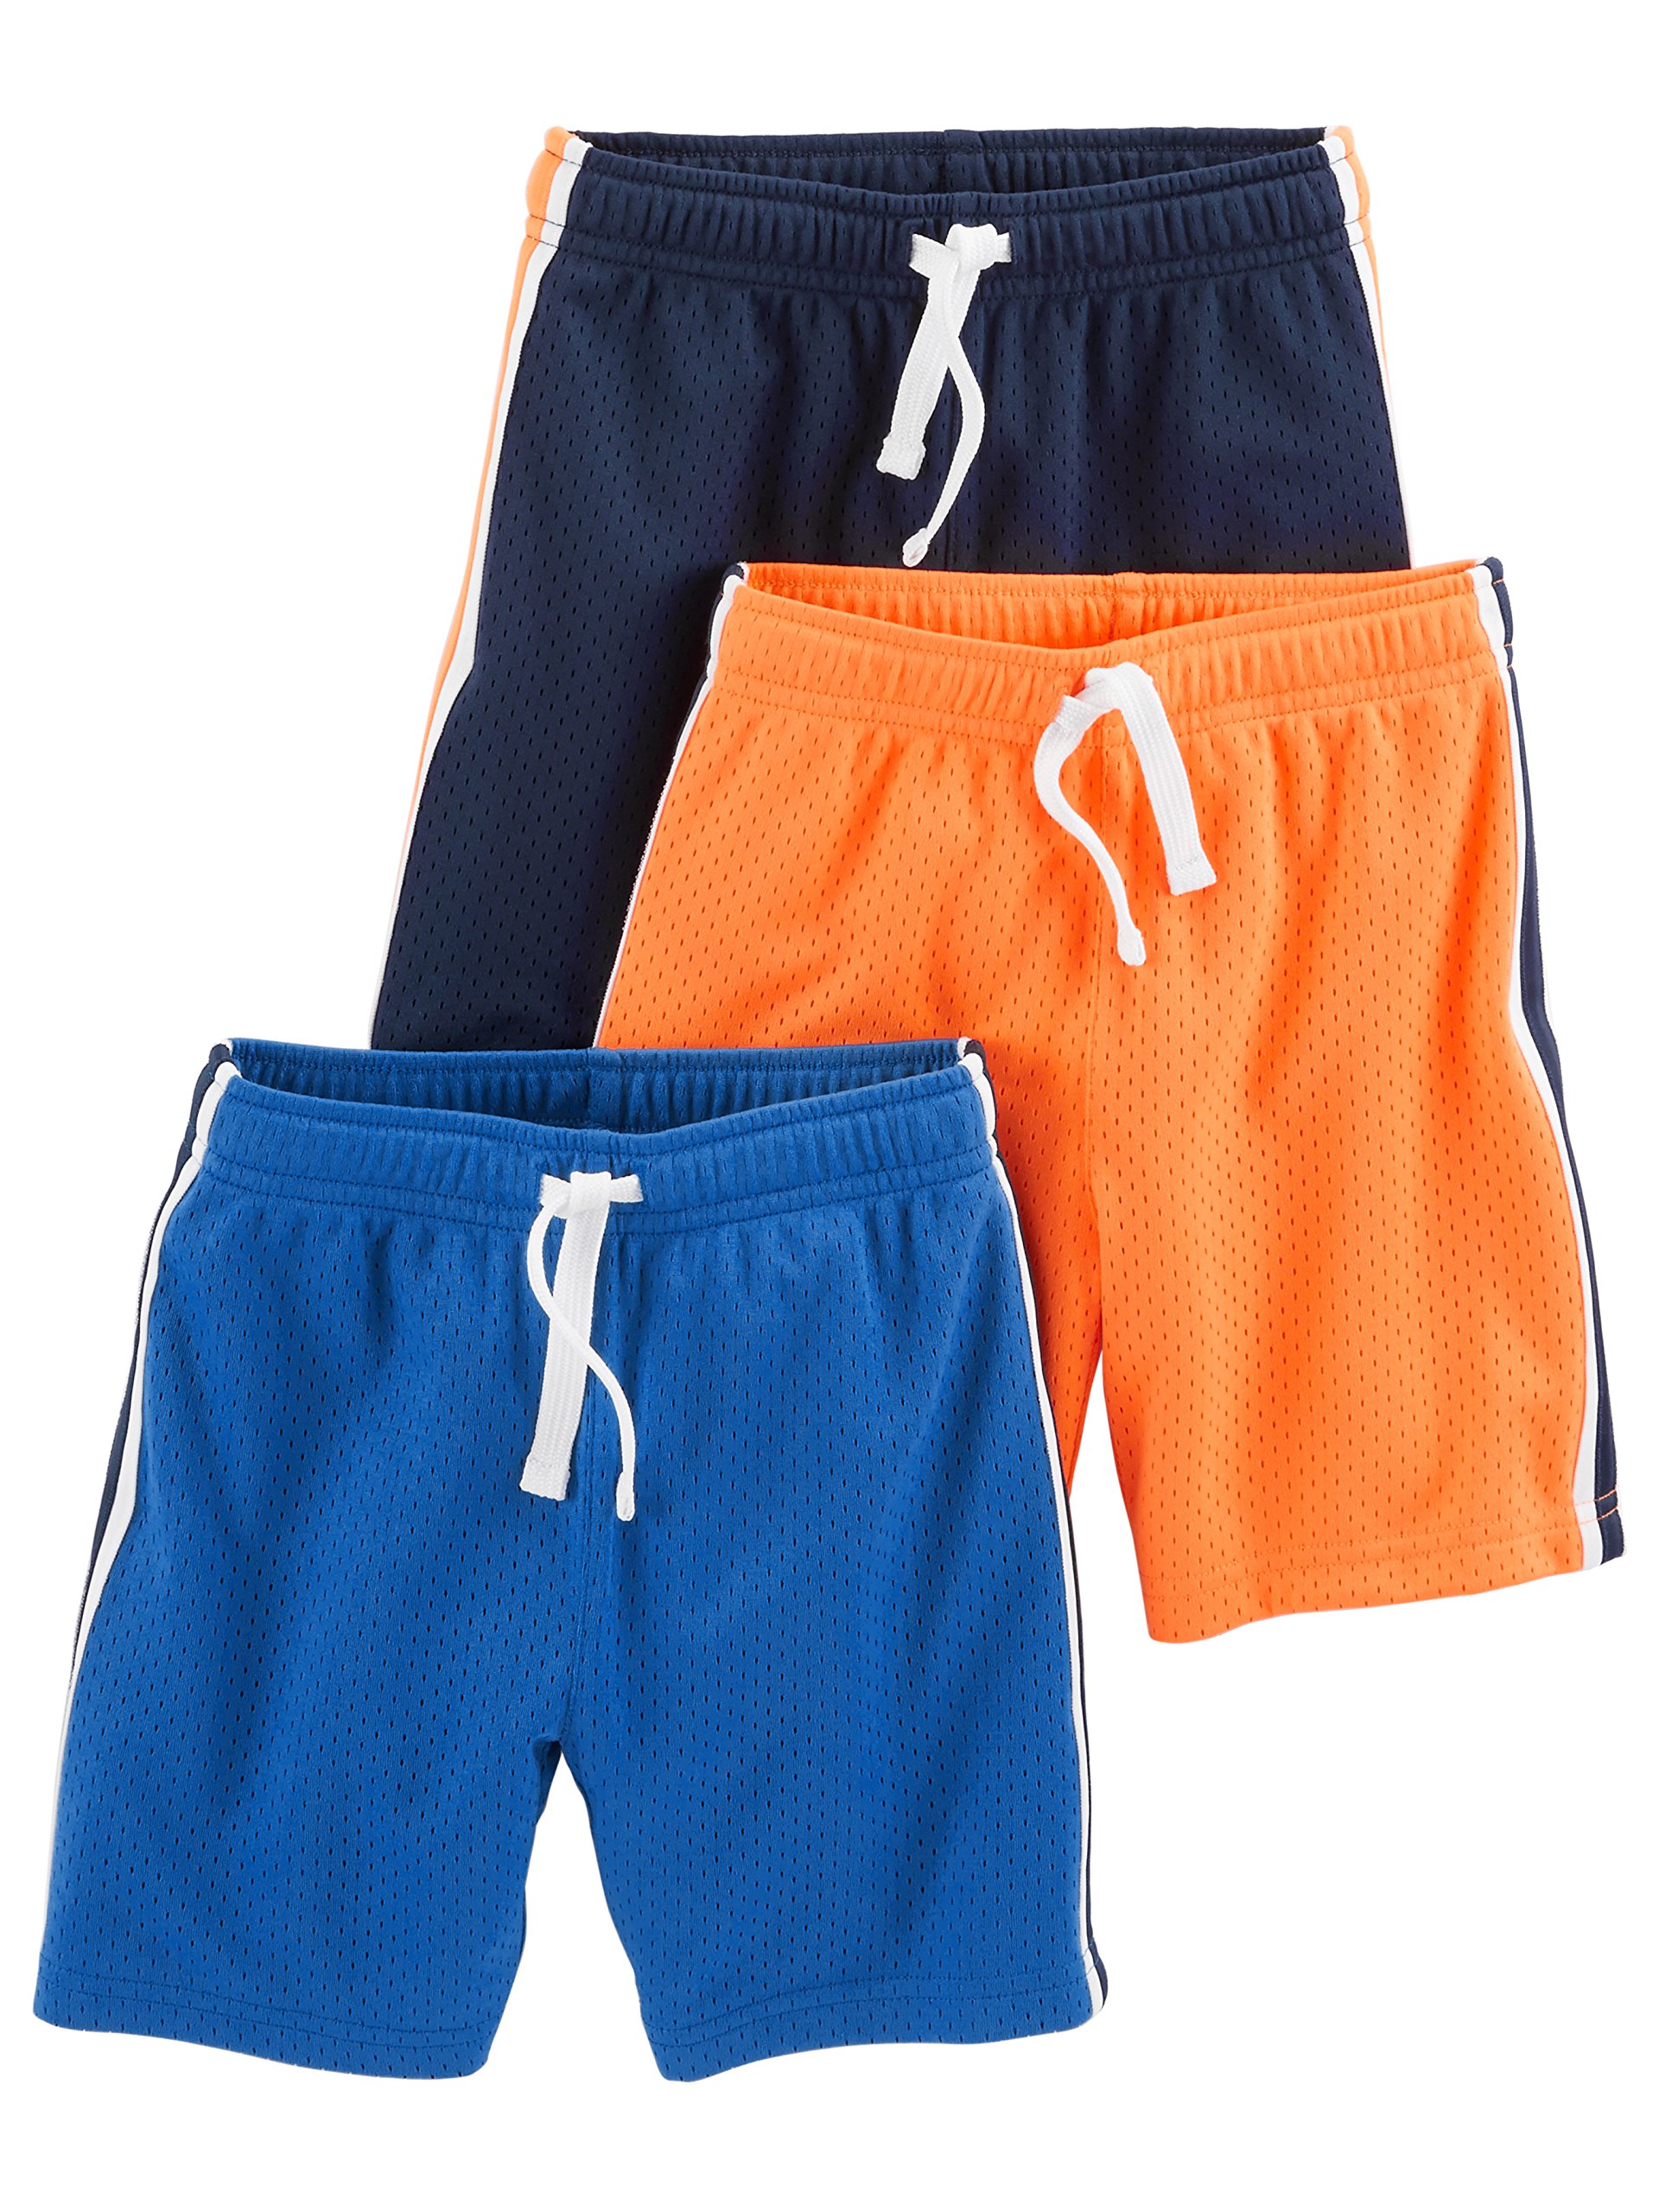 Simple Joys by Carter's Boys' 3-Pack Mesh Shorts